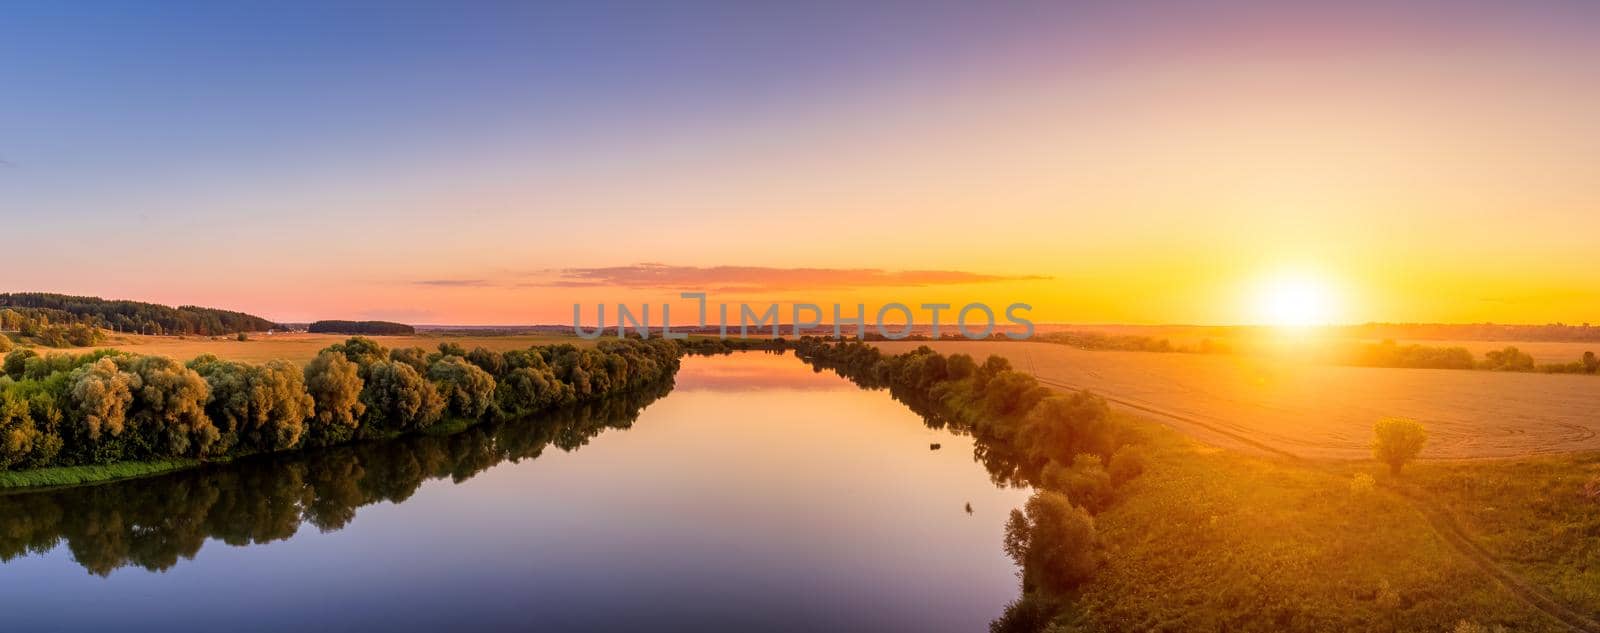 A sunset or sunrise scene over a lake or river with skies reflecting in the water on a summer evening or morning. Panorama.